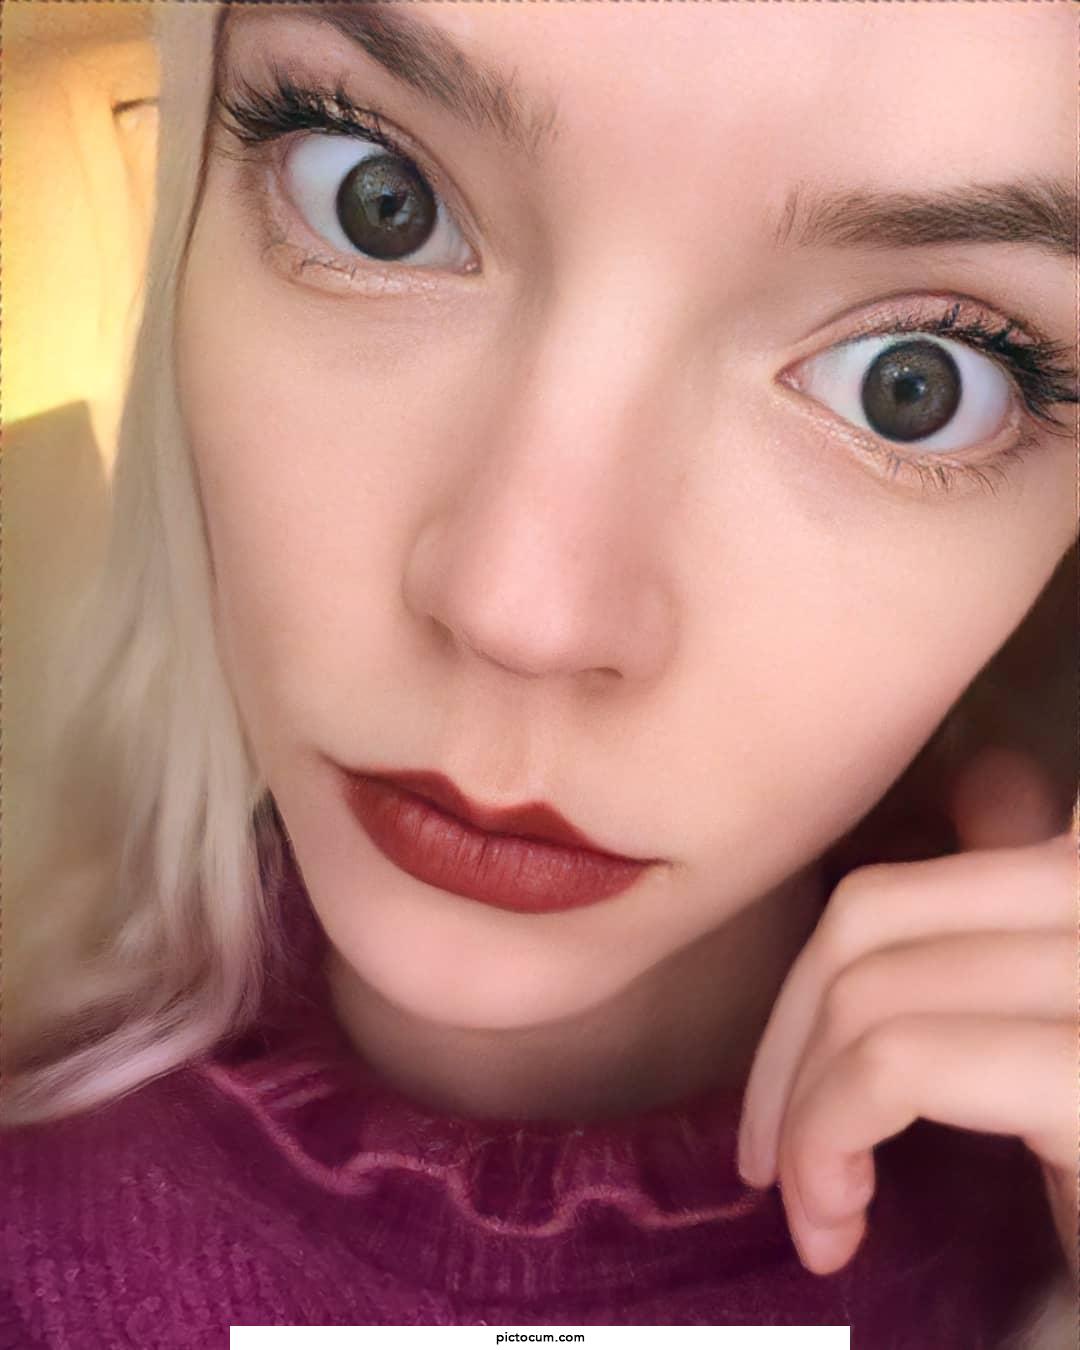 A blowjob from Anya Taylor-Joy would be heavenly! Just imagine it, this big gorgeous eyes looking at you while she's sucking your cock